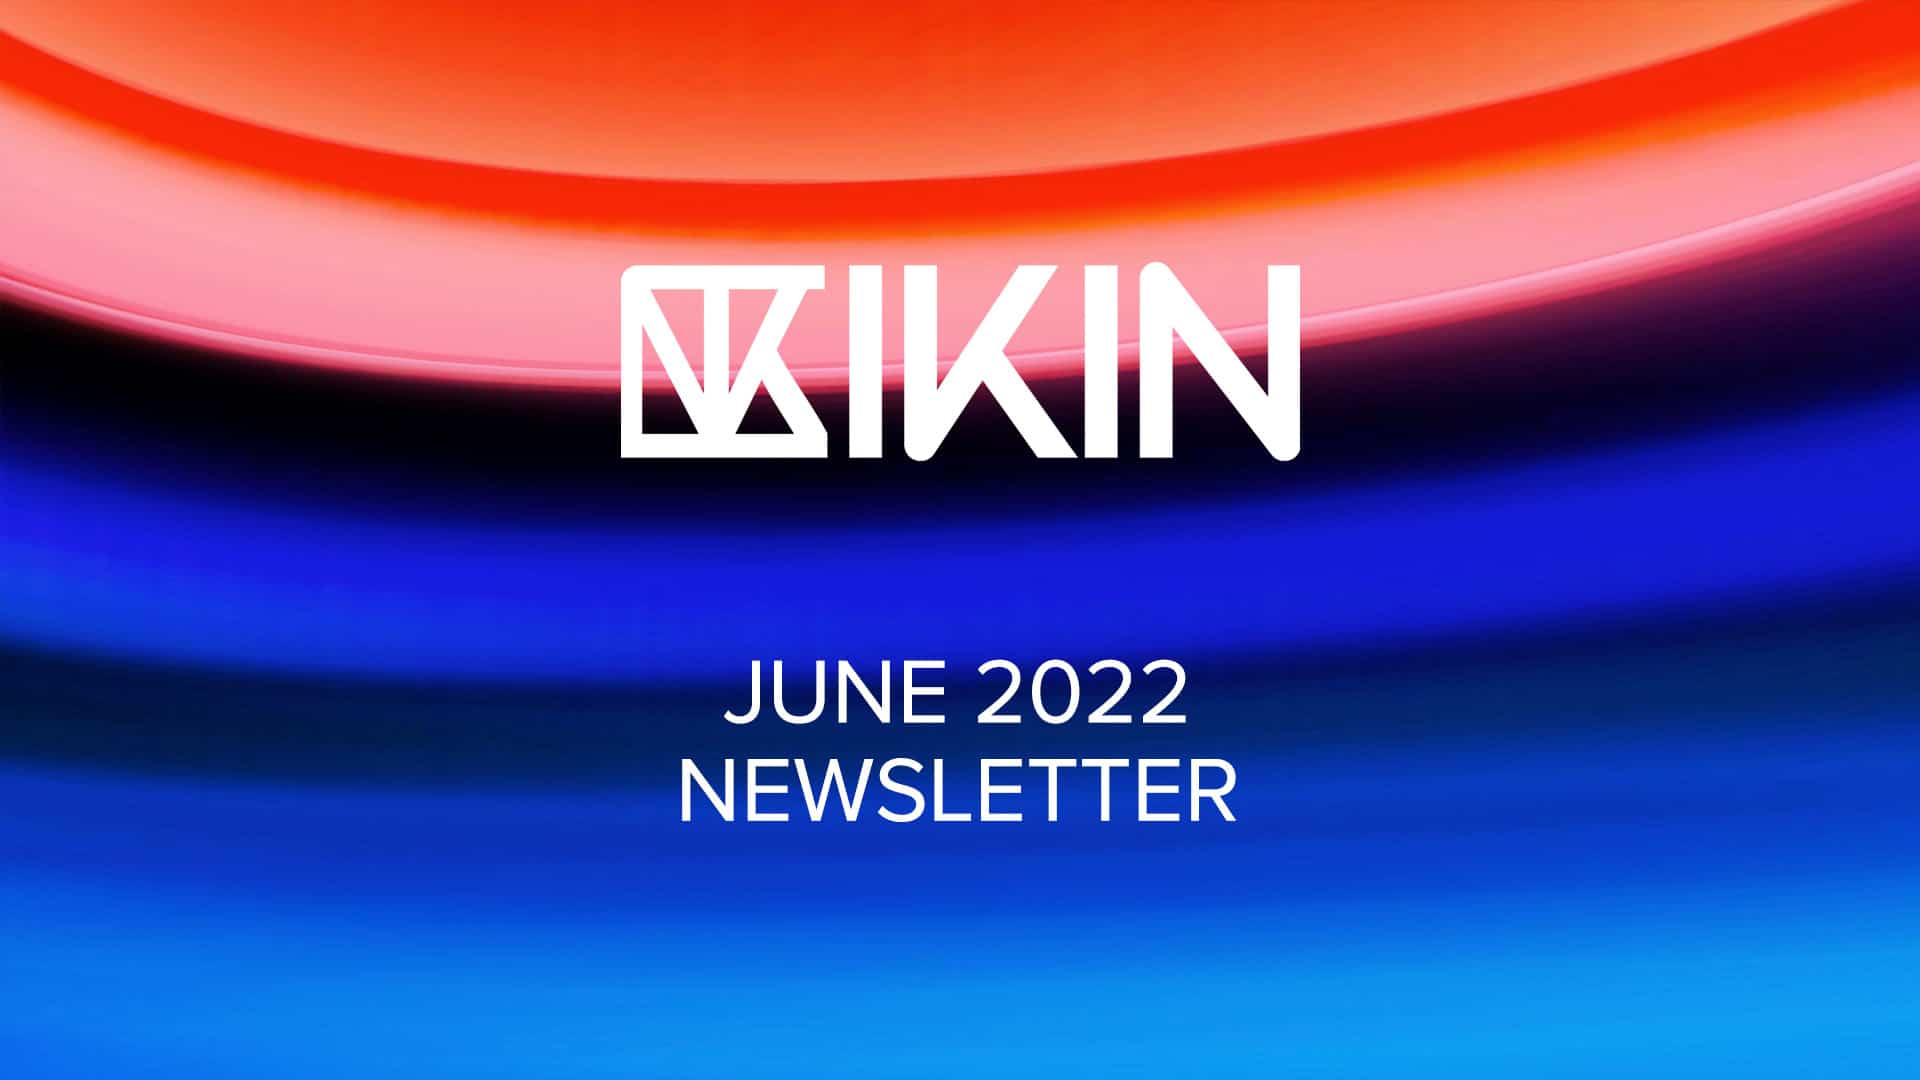 June 2022 Newsletter text over colorful background